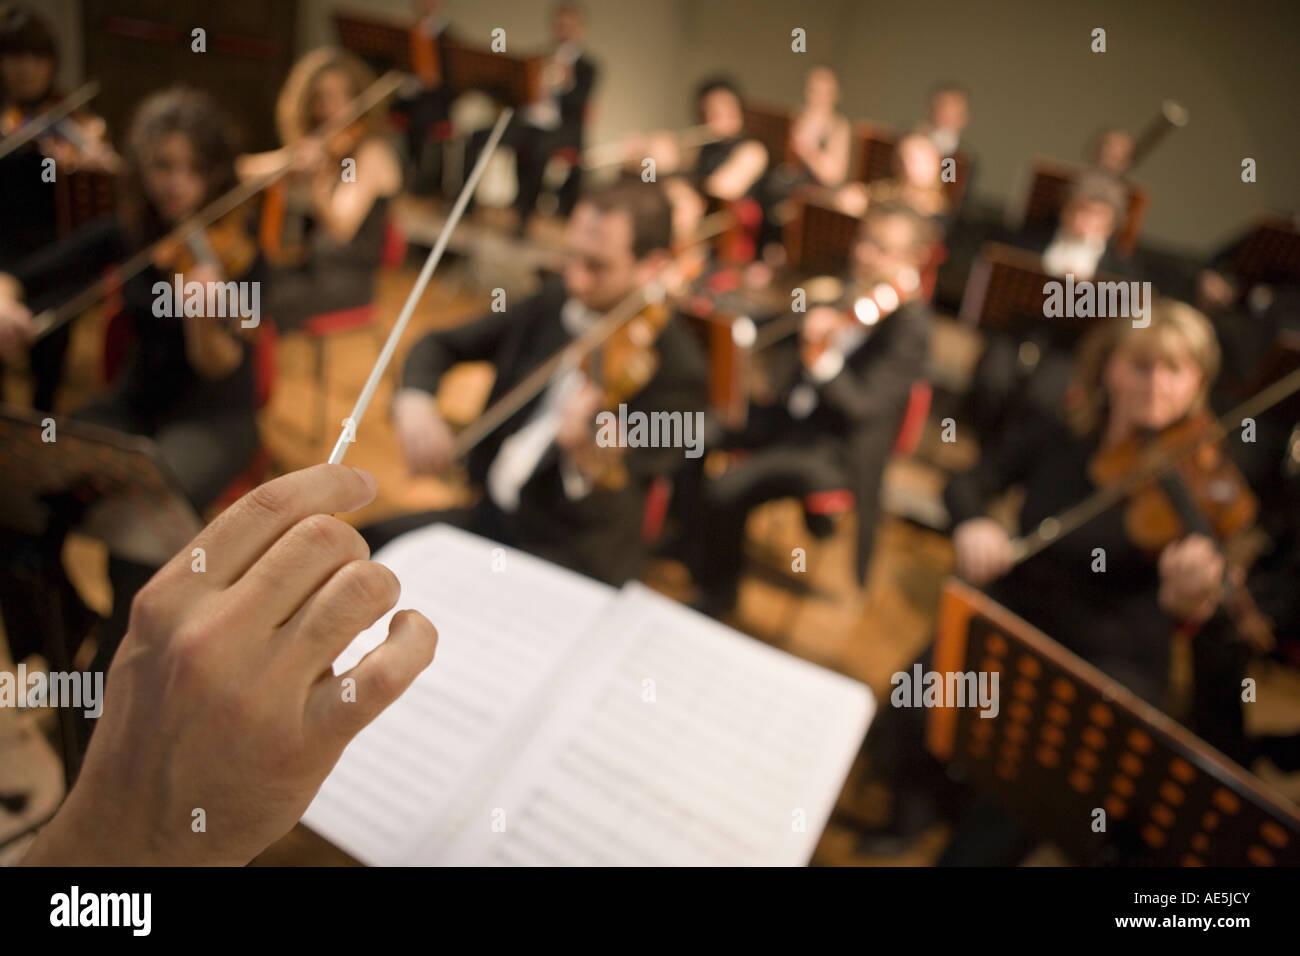 Director Directing the Classic Music Orchestra Stock Photo